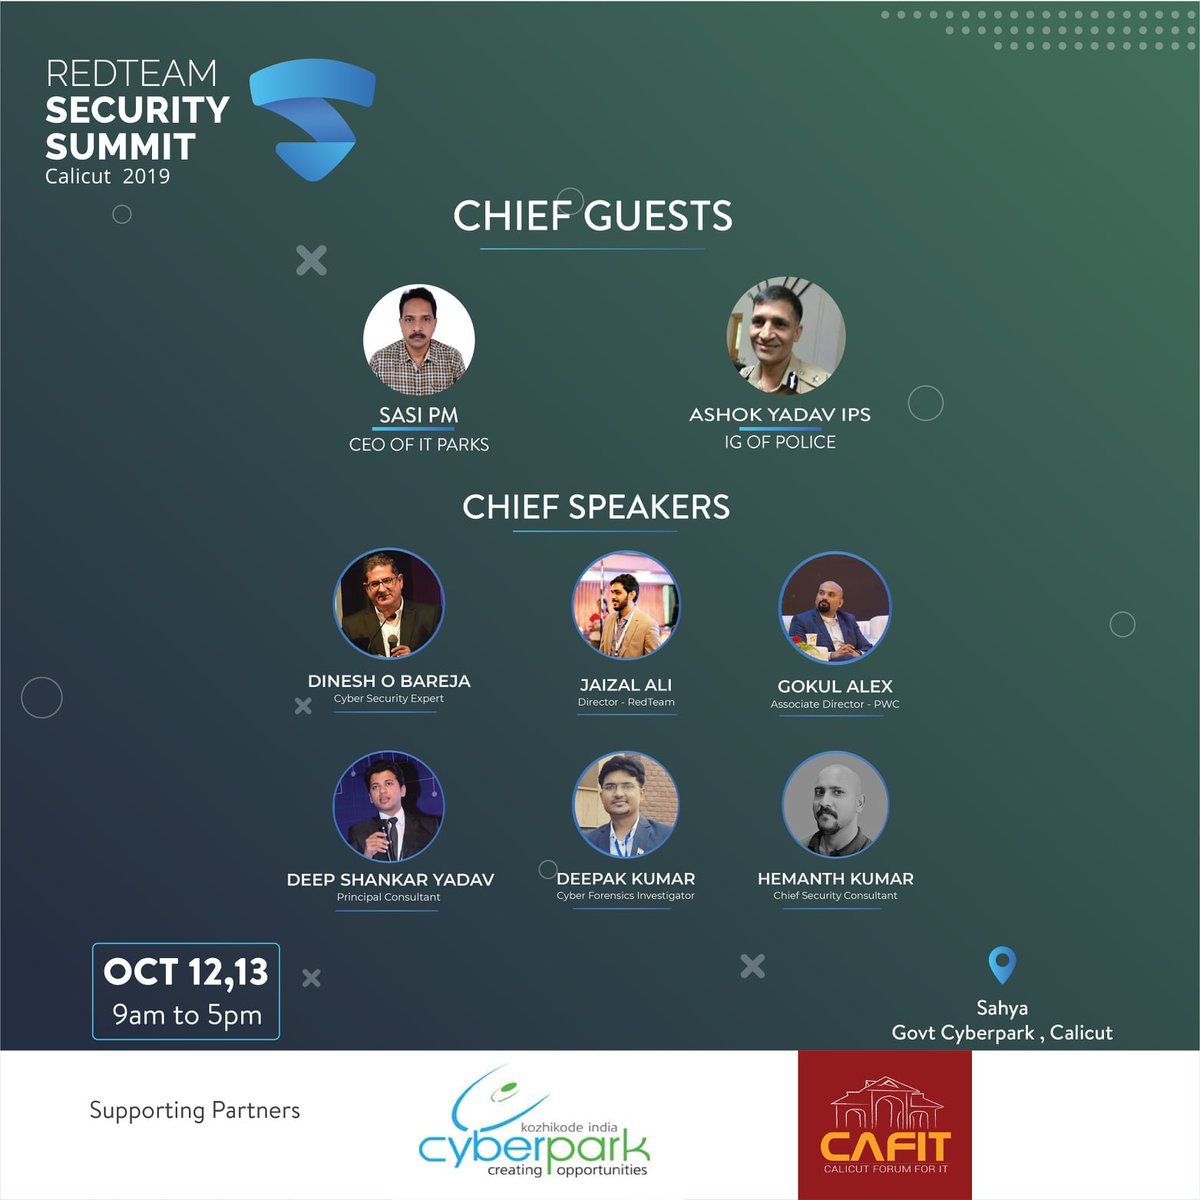 It is exciting to be a keynote speaker about #QuantumComputing #QuantumSupremacy in the #RedTeamSecuritySummit2019. This session will be a journey through the #QuantumArchitectures, #QuantumCircuits #QuantumAlgorithms etc. All are invited !